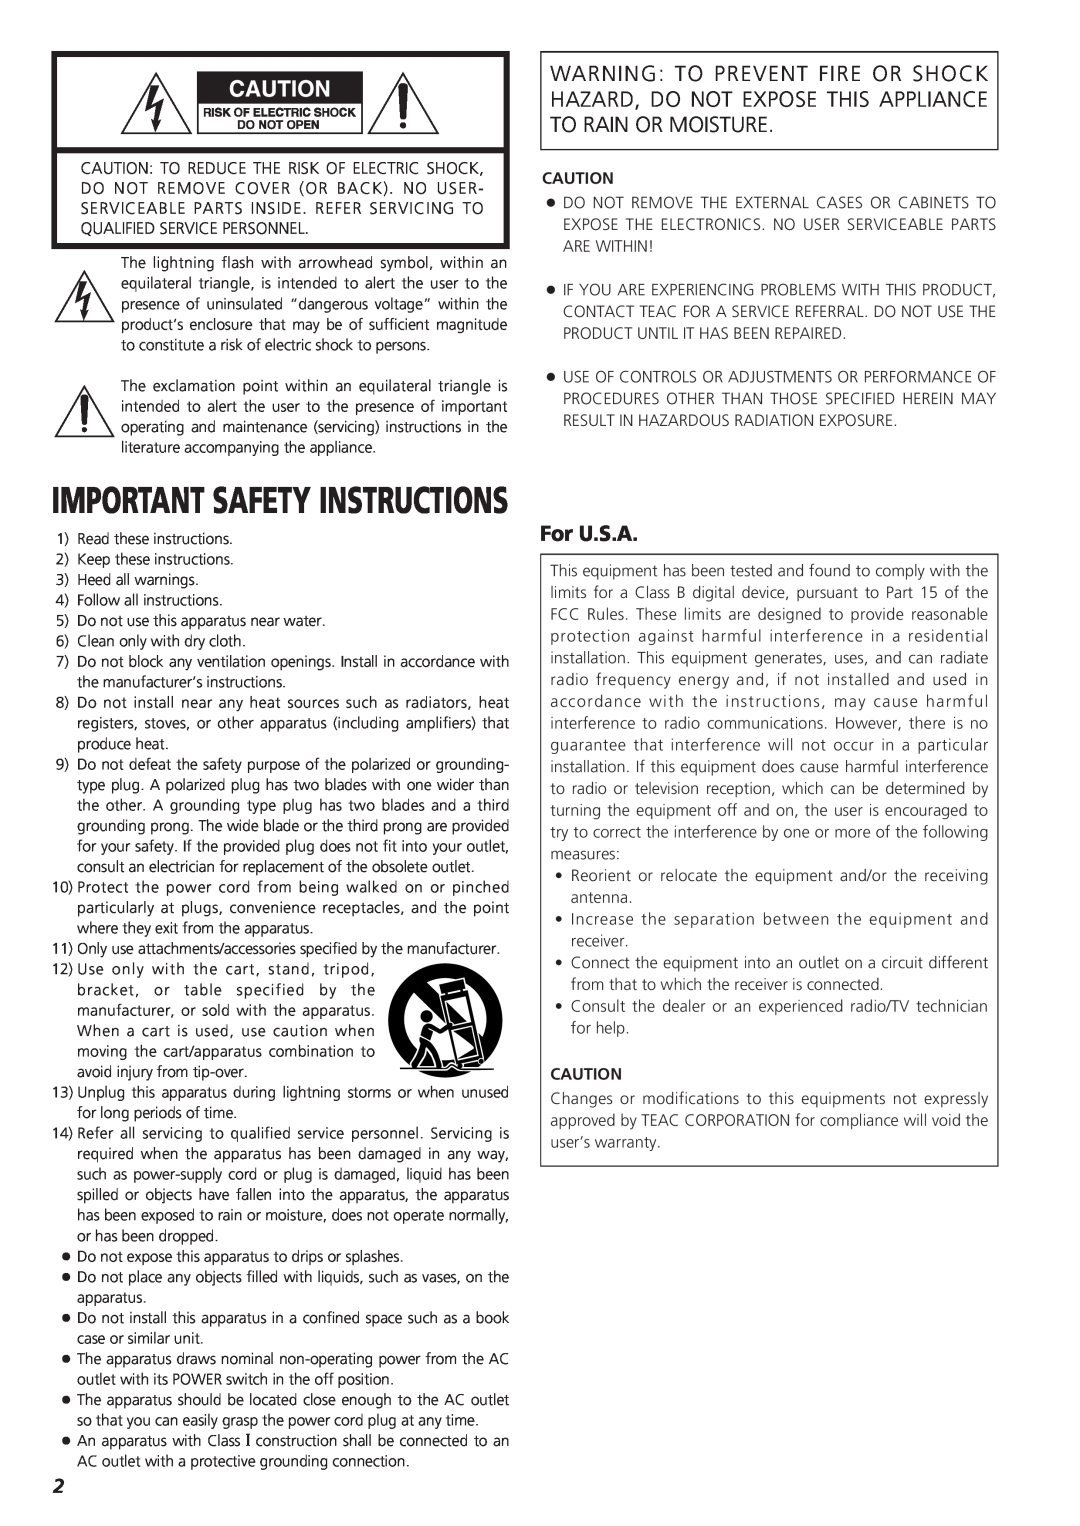 Esoteric D00816700B manual For U.S.A, Important Safety Instructions 